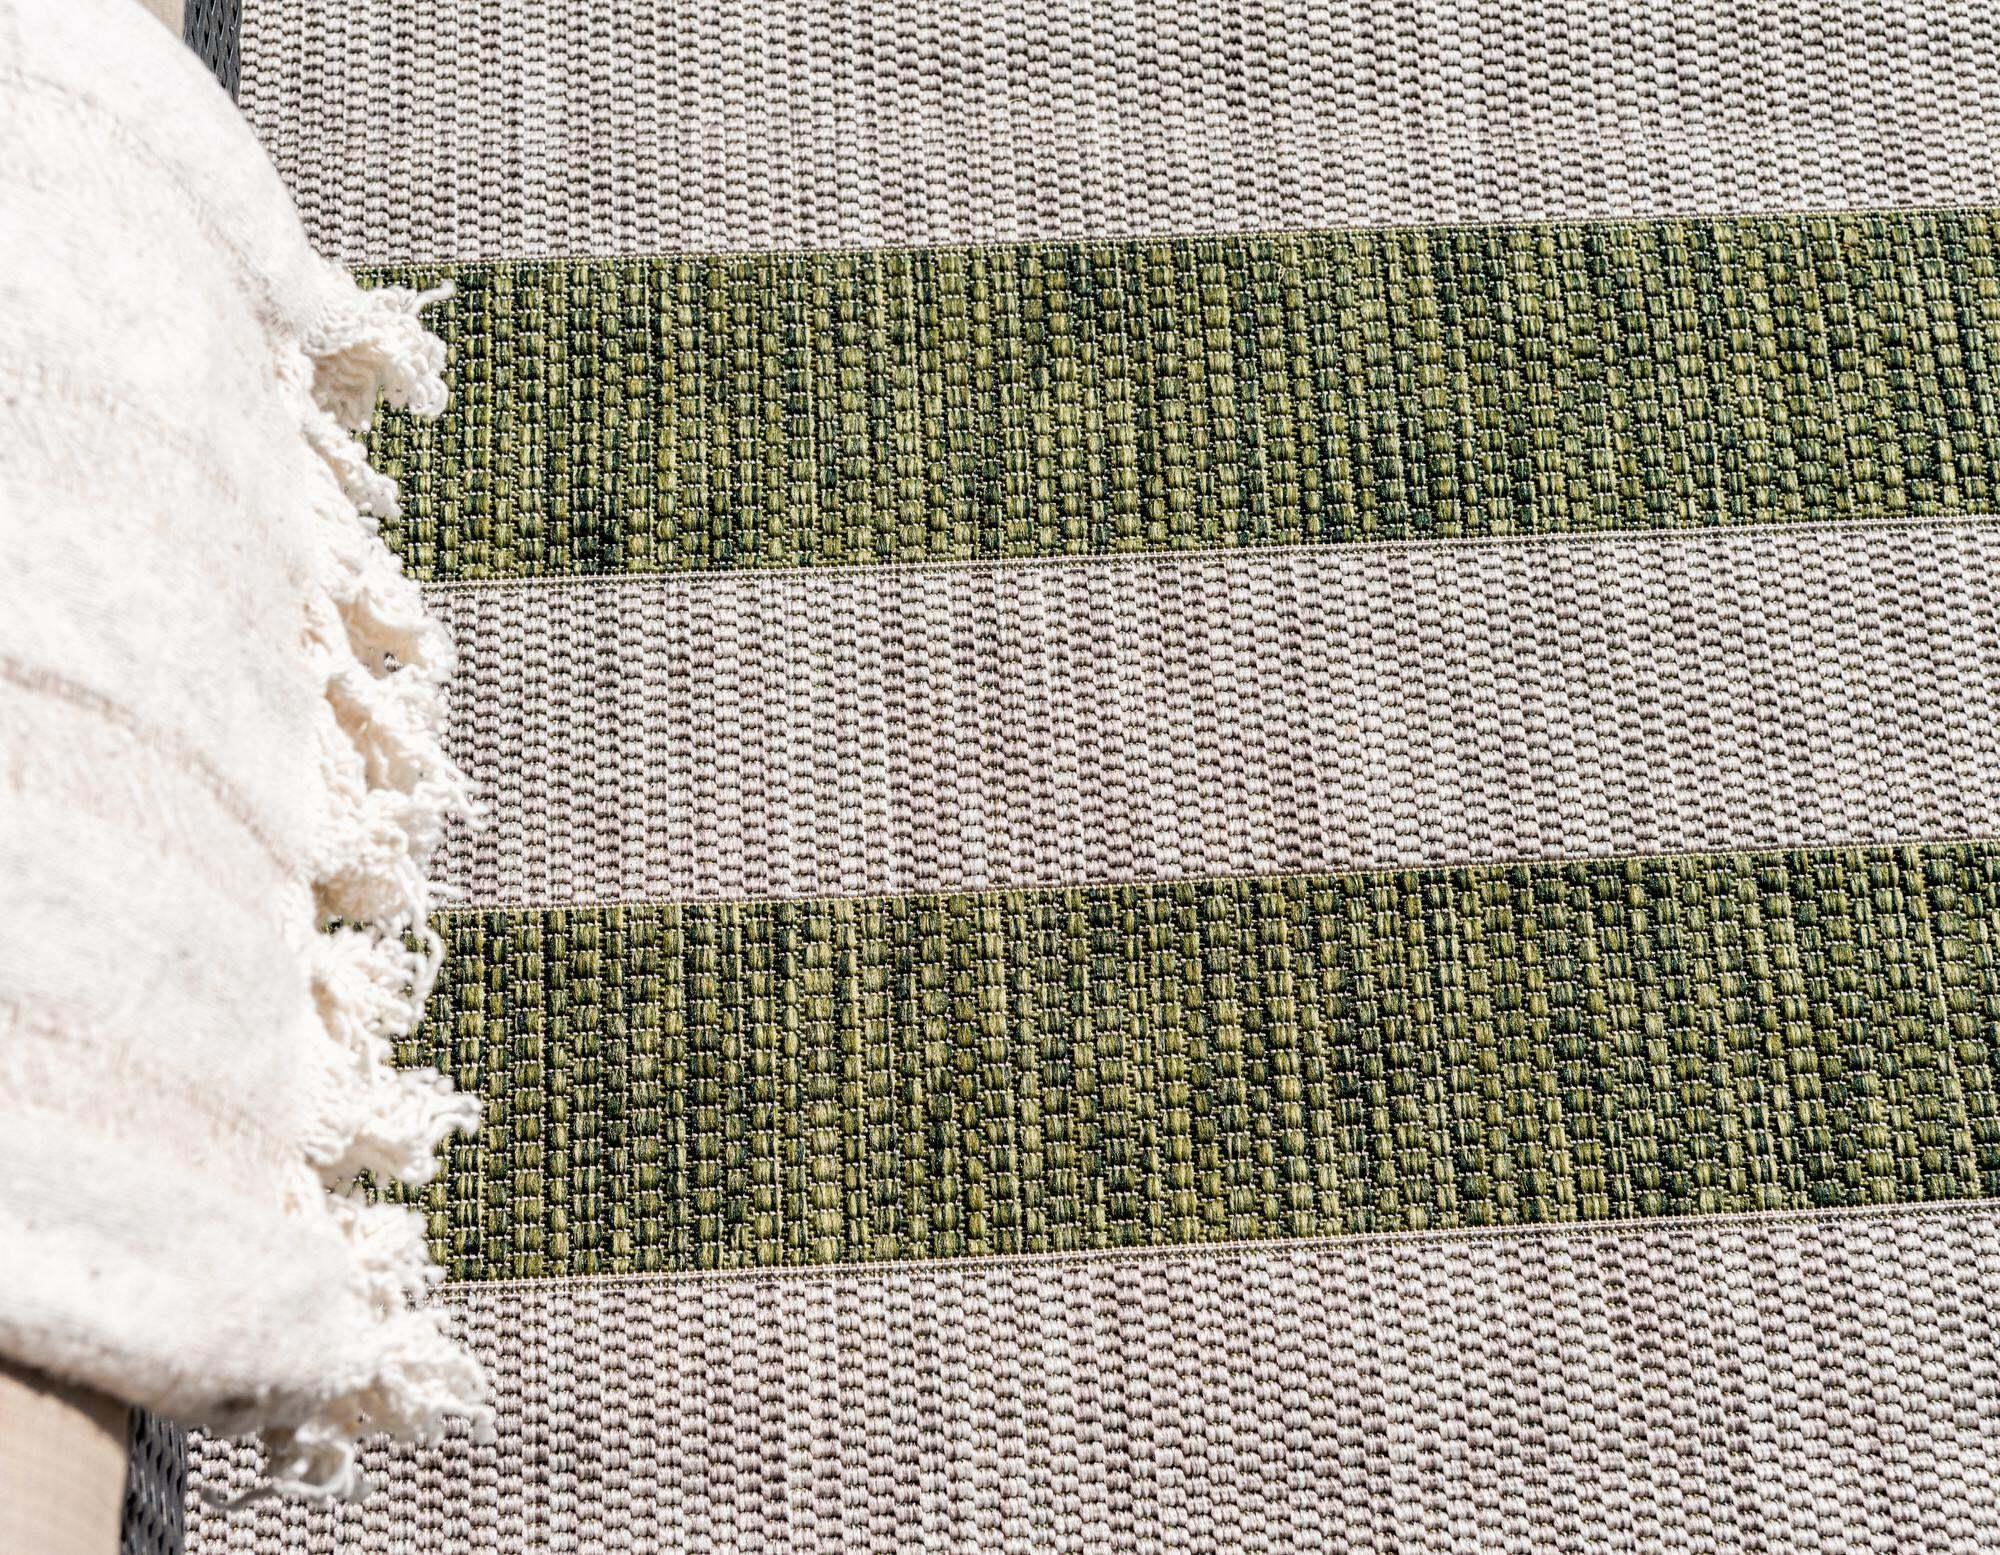 Unique Loom Outdoor Rugs - Outdoor Striped Striped Rectangular 9x12 Rug Green & Ivory